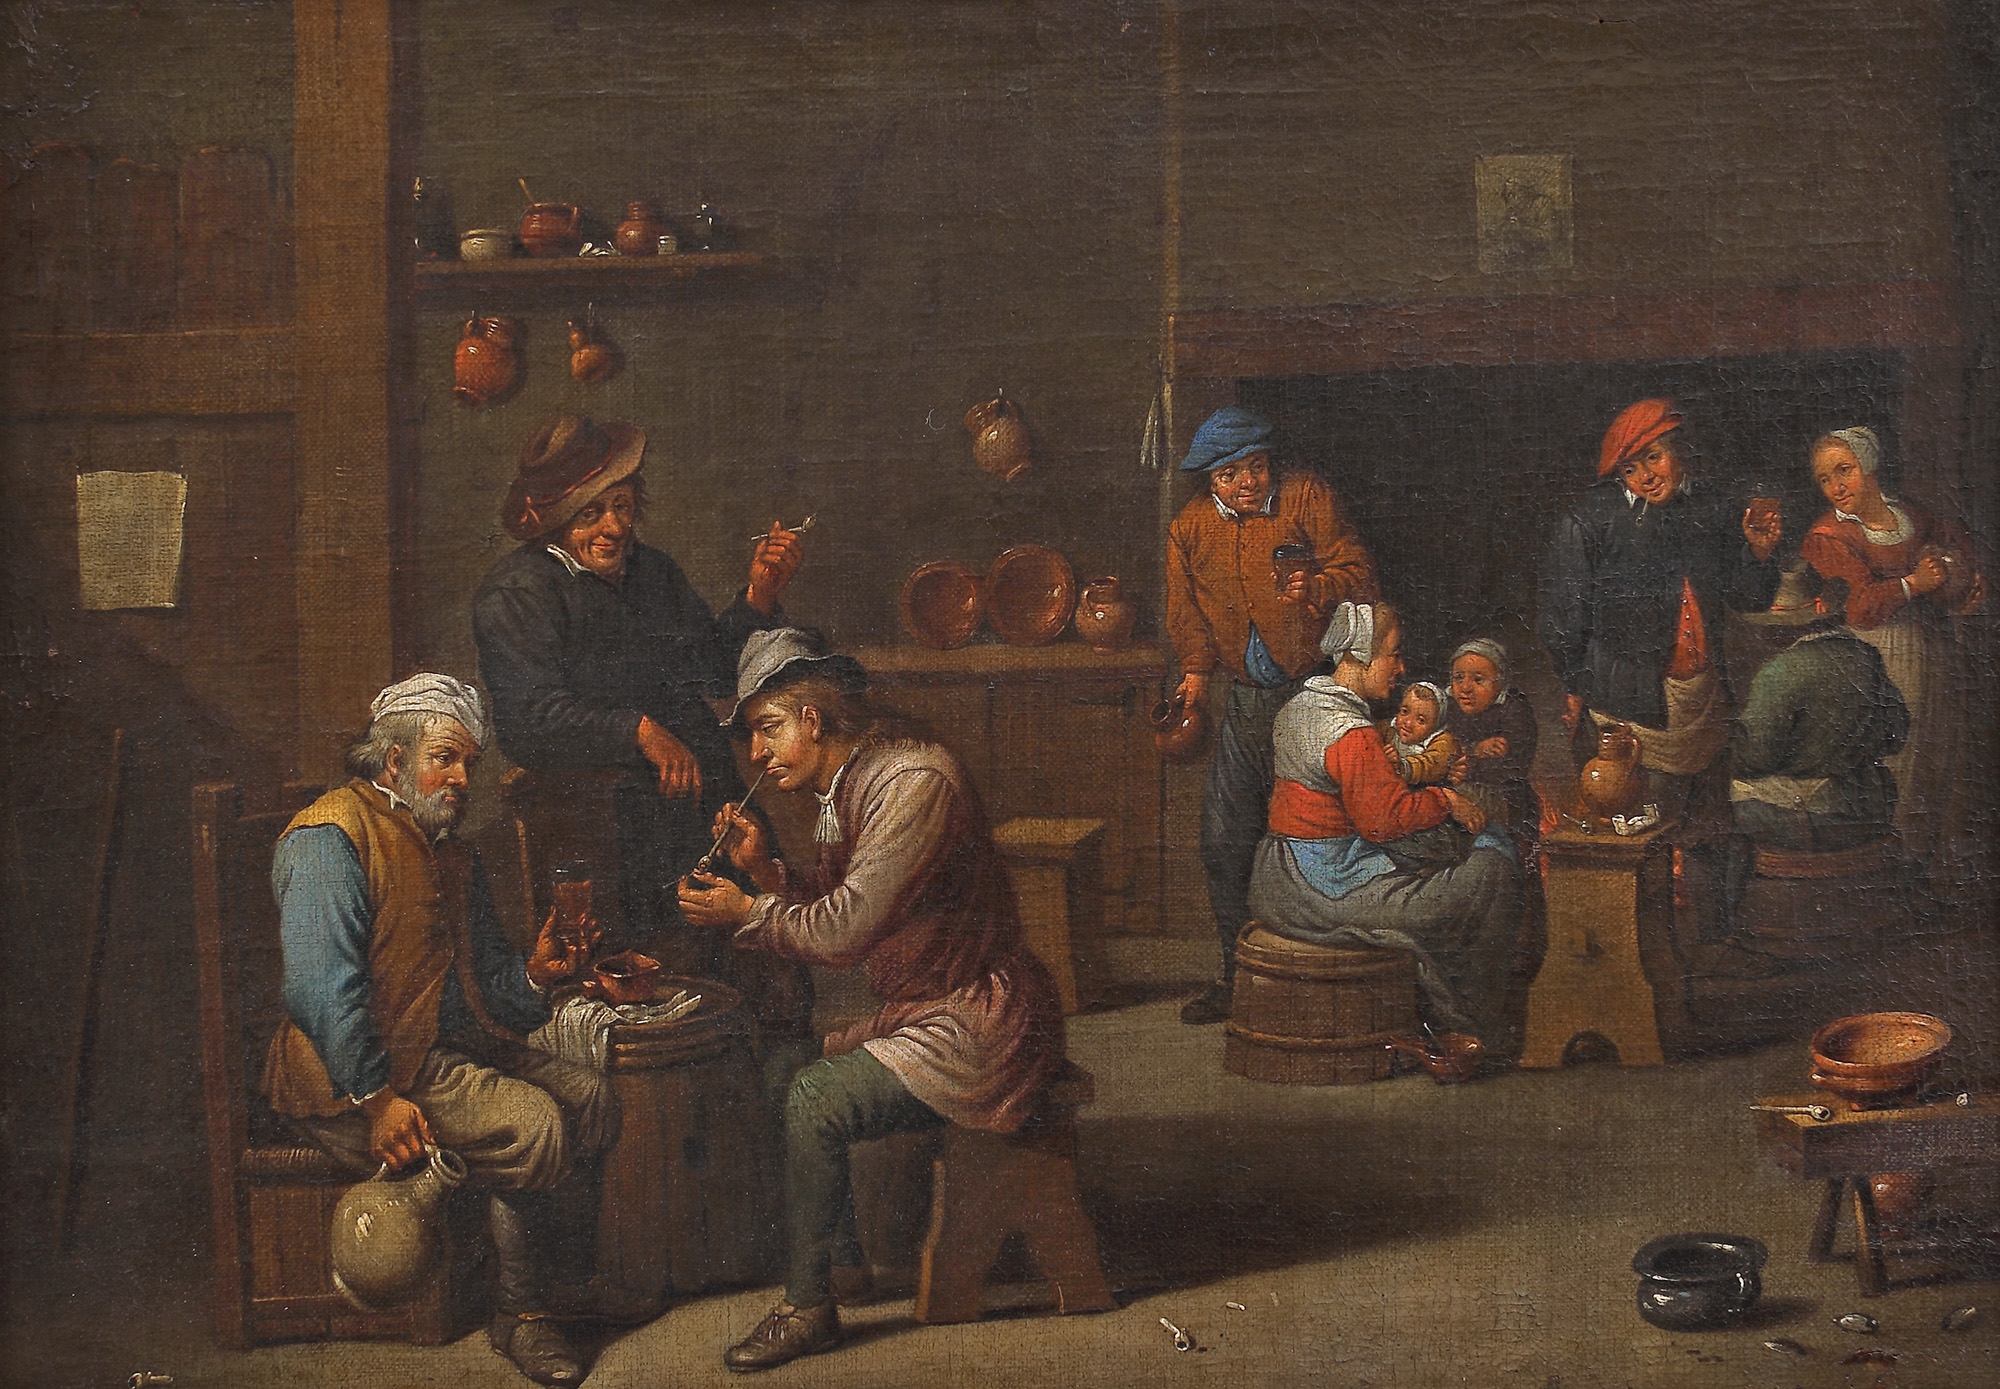 David Teniers the Younger manner, At the Tavern